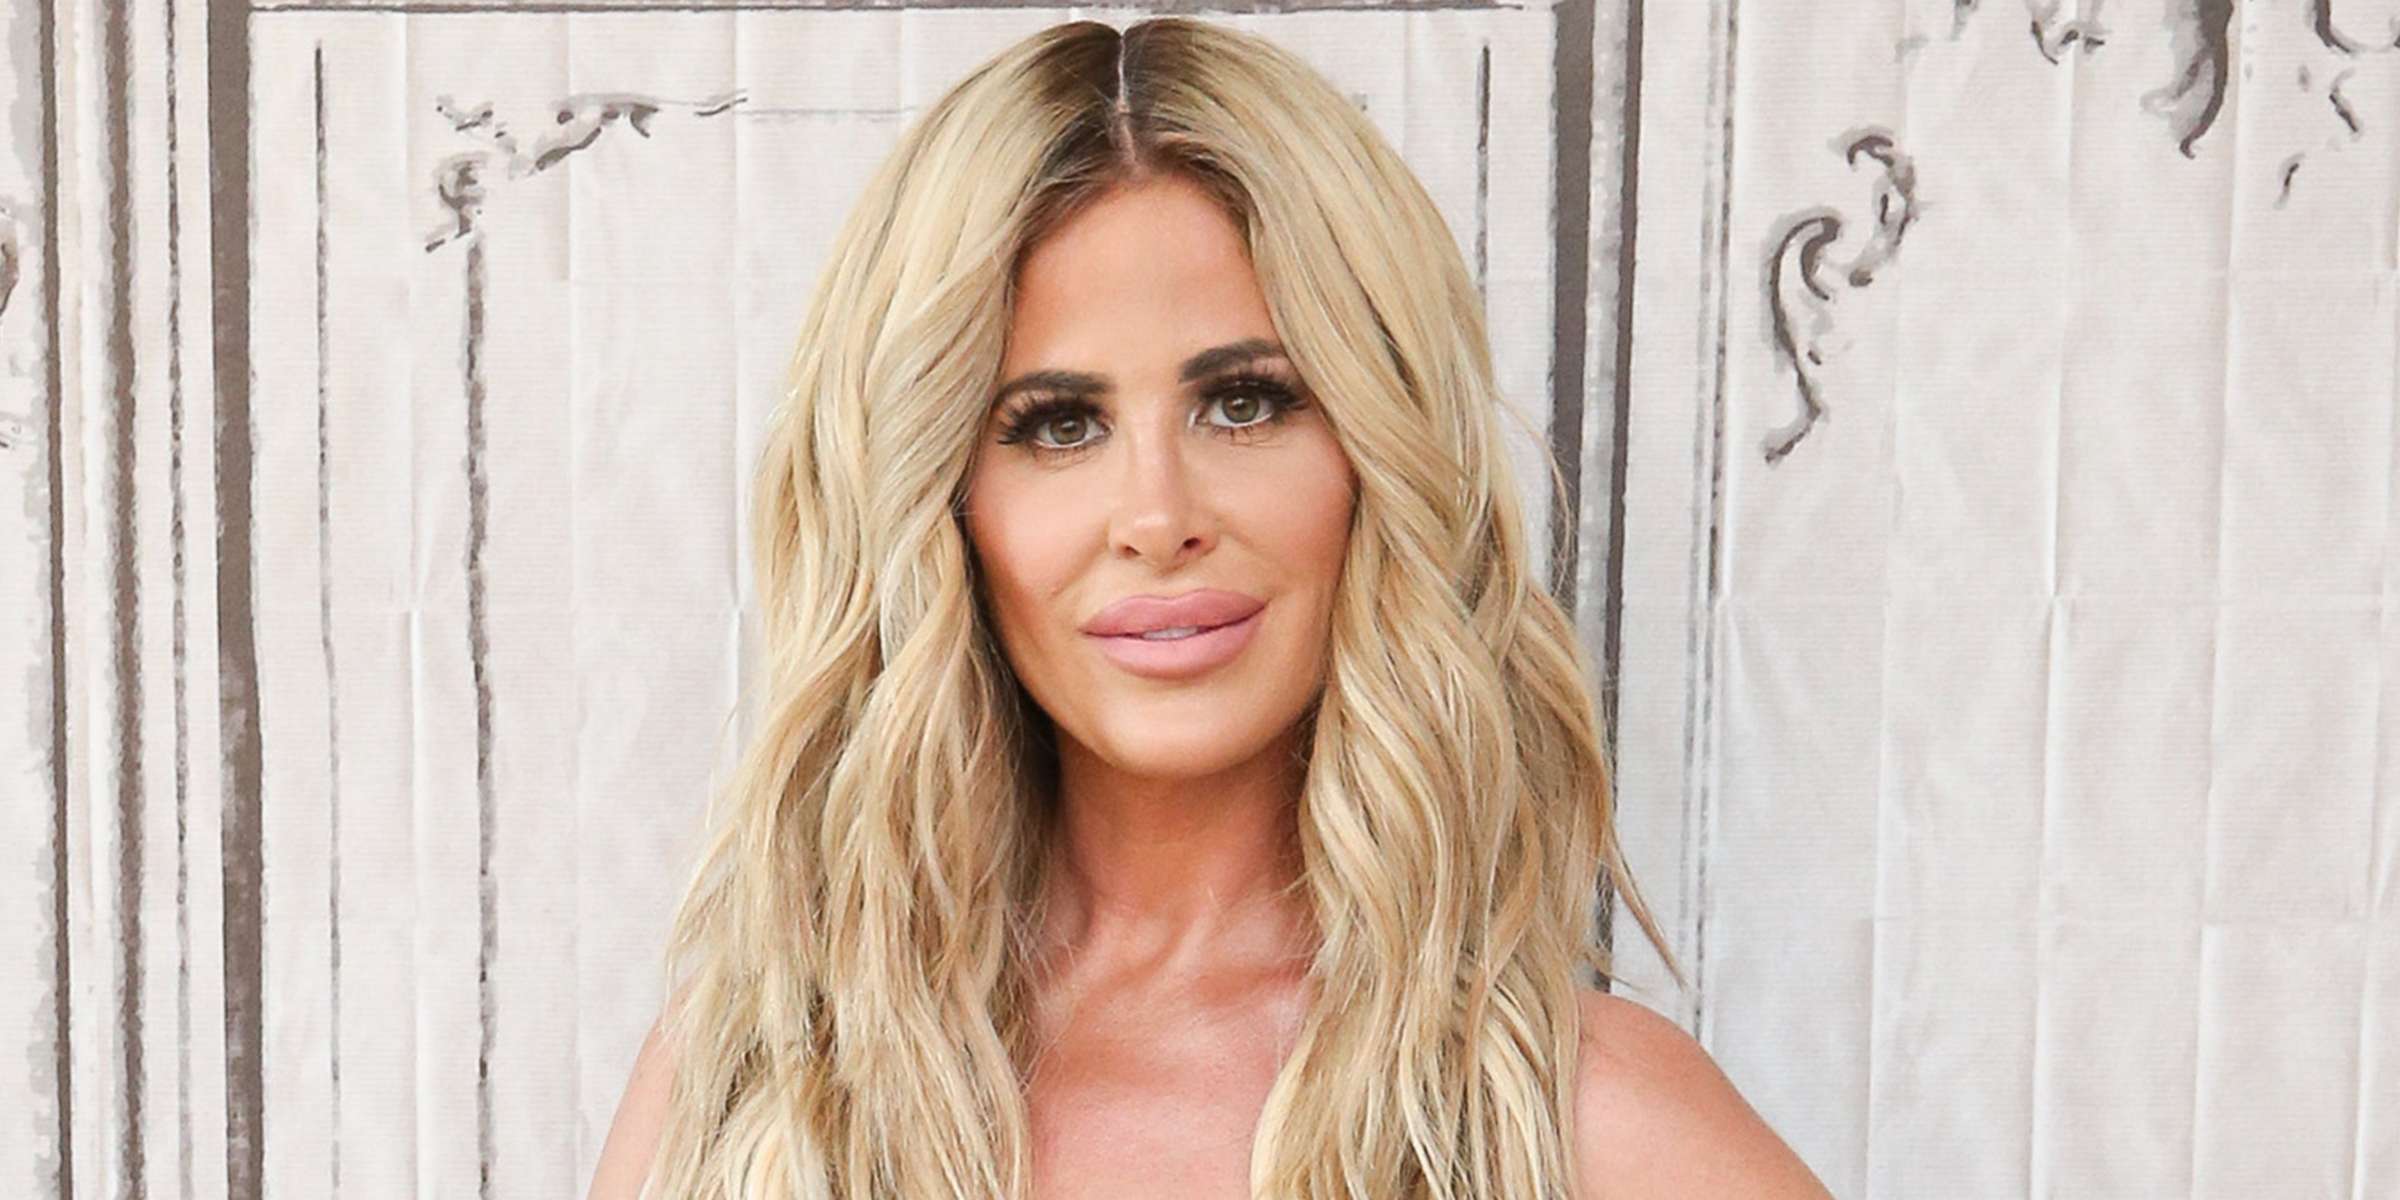 44 Facts About Kim Zolciak - Facts.net